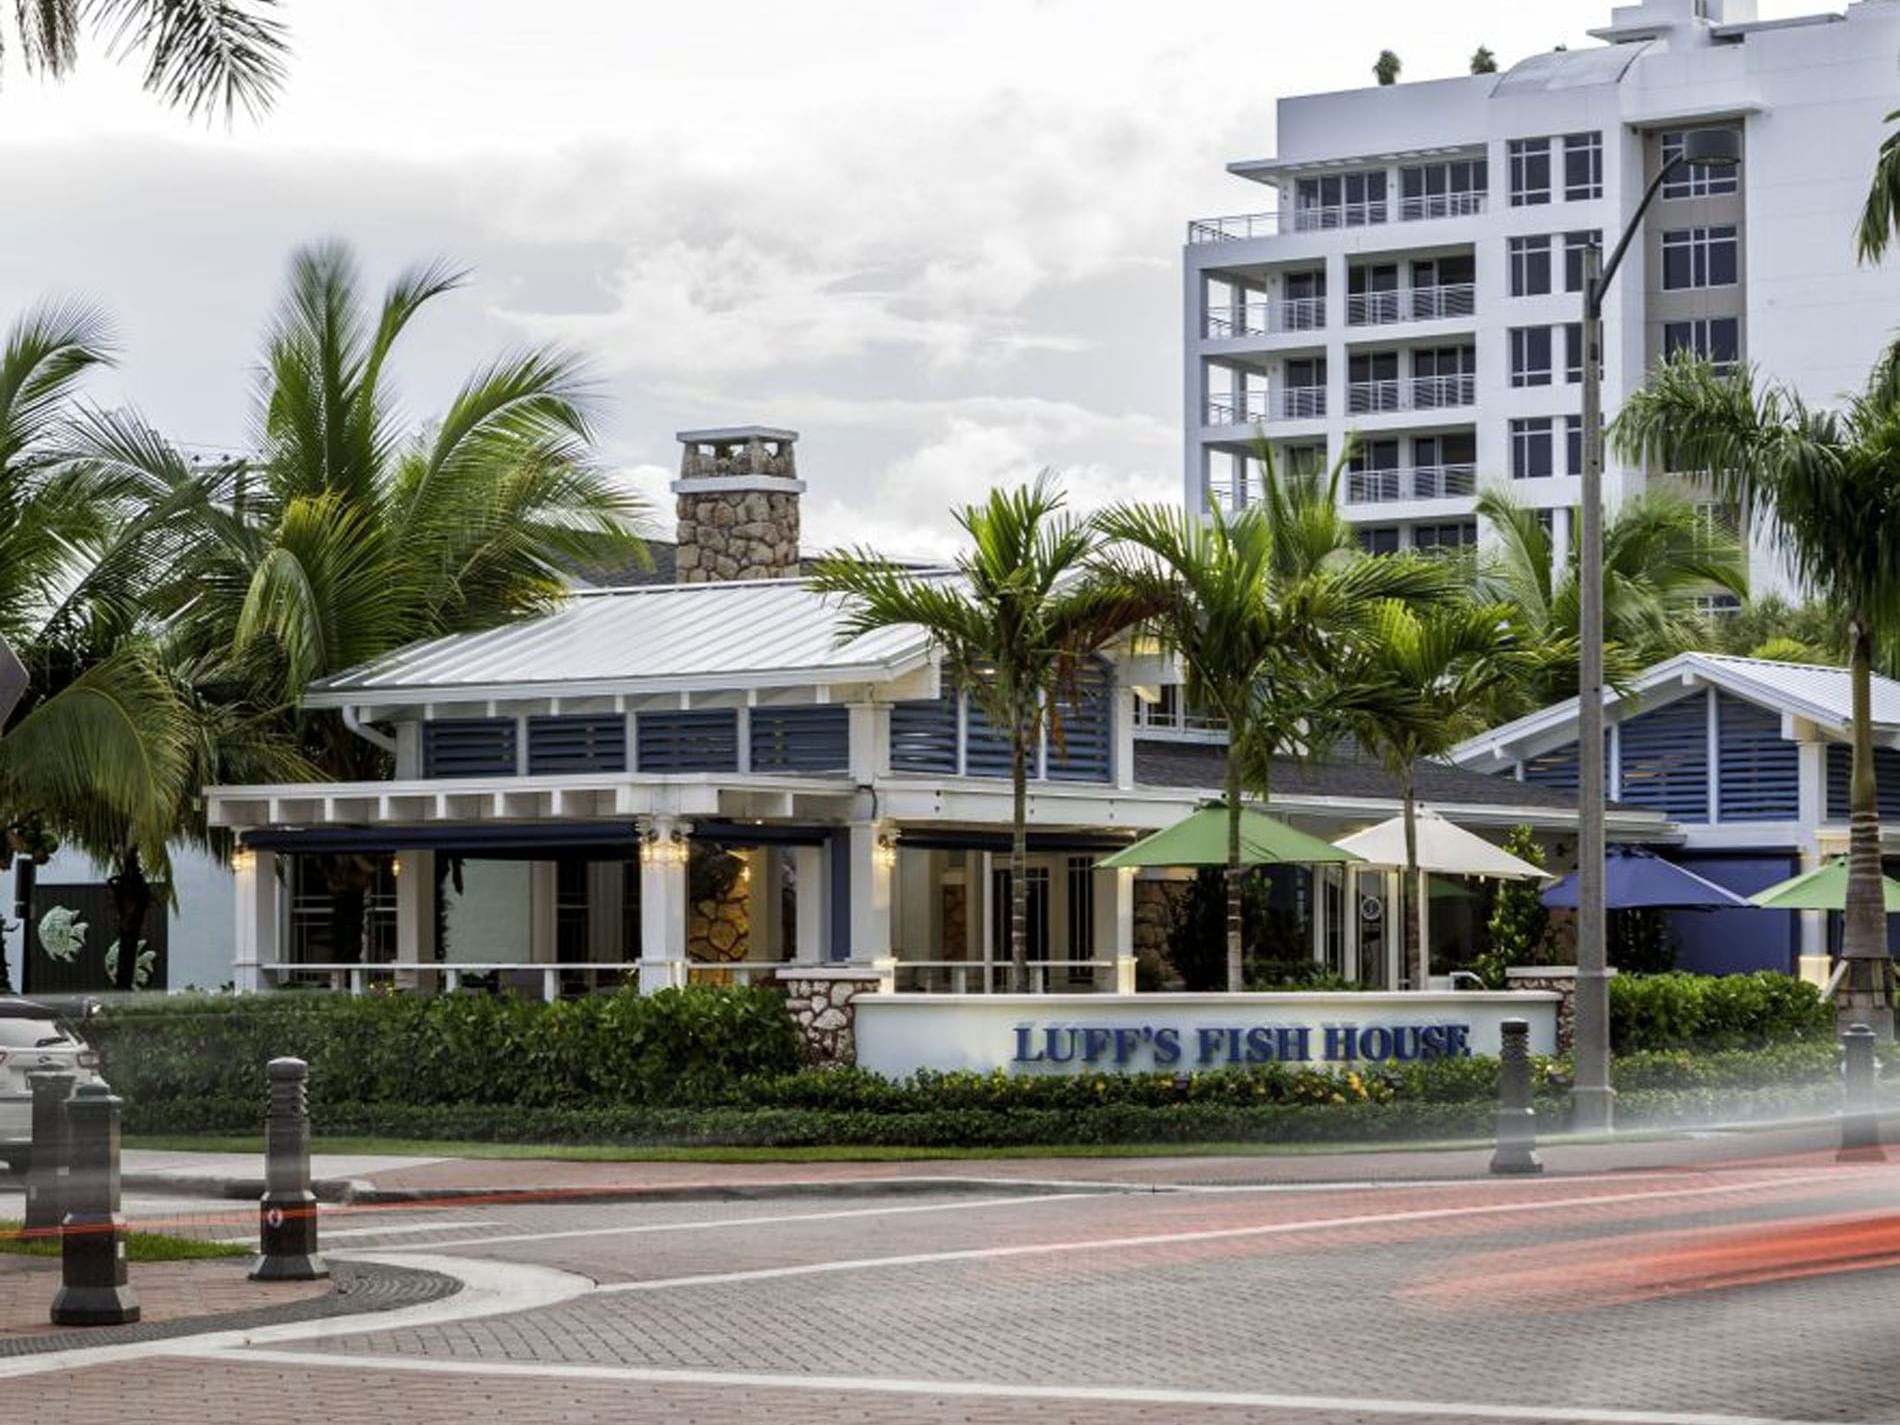 Street & exterior view of the Luff's Fish House near Ocean Lodge Boca Raton